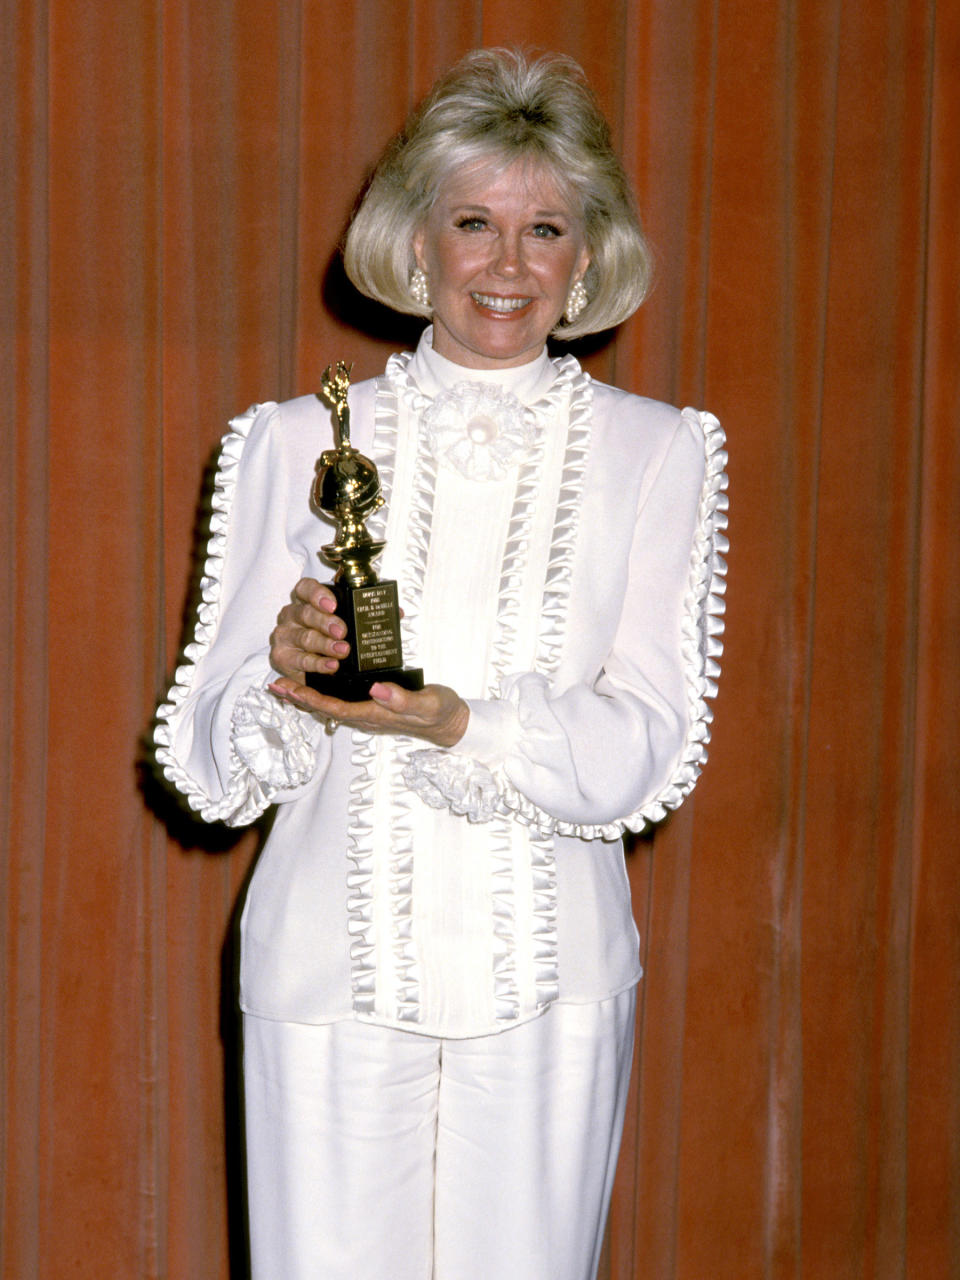 Doris Day at the 46th Annual Golden Globe Awards on January 28, 1989